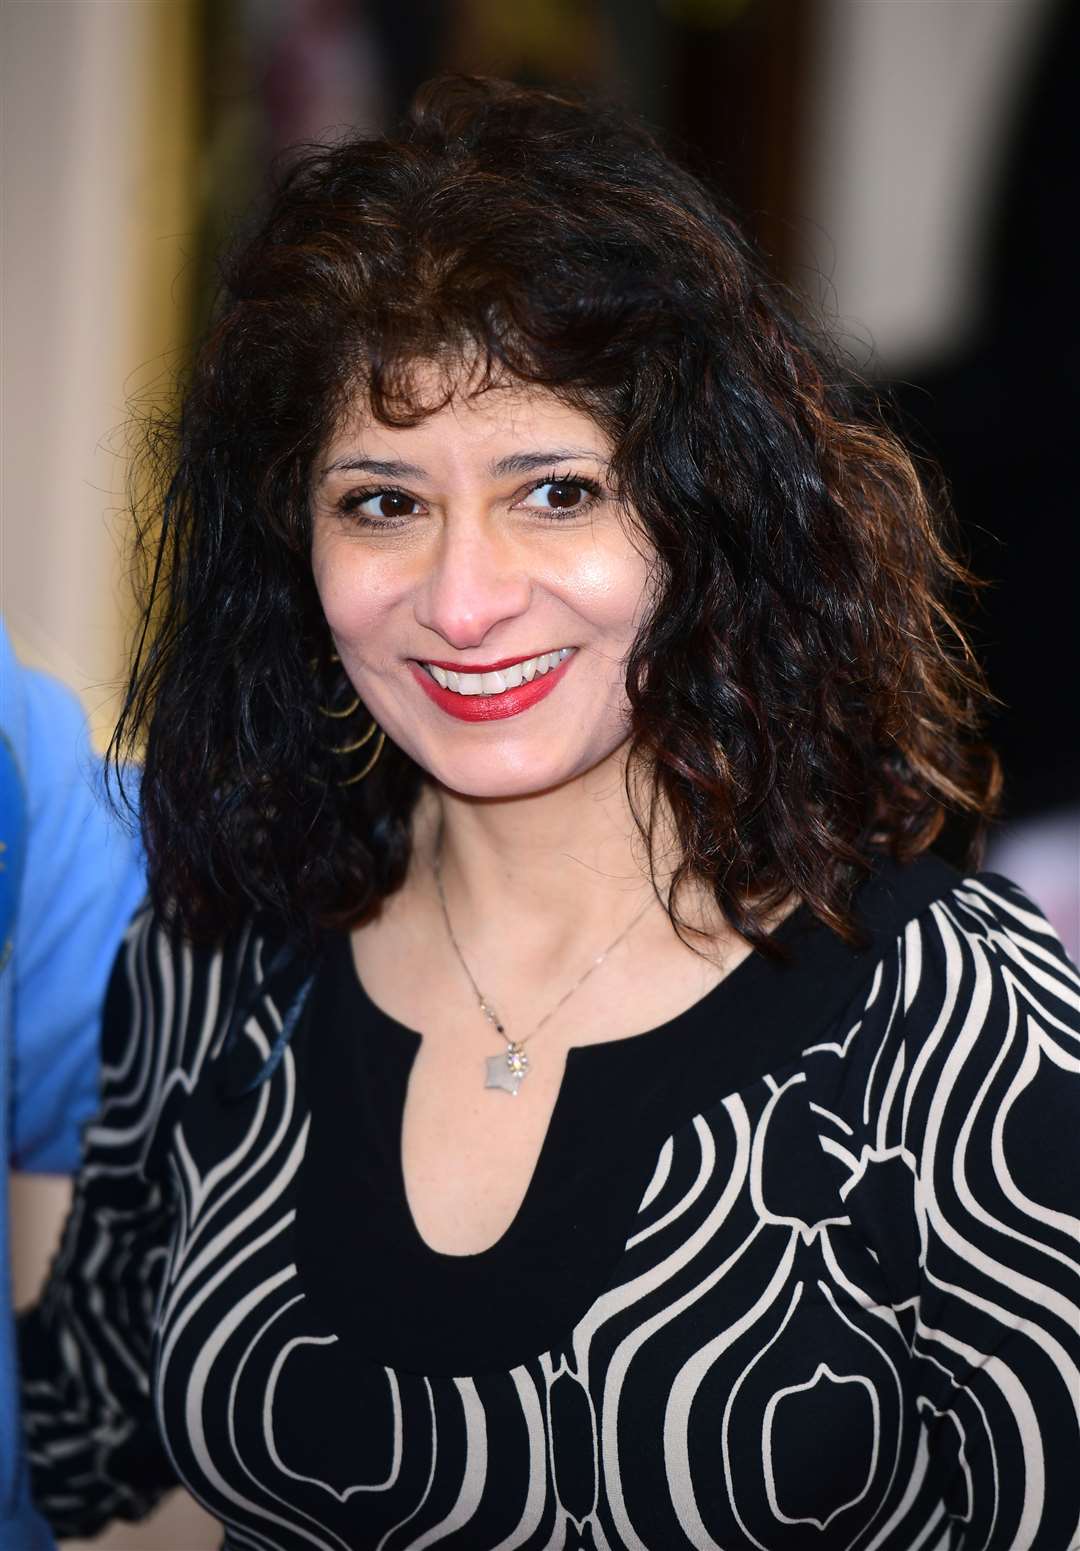 Shappi Khorsandi is part of a new campaign aimed at rewriting the narrative around refugees (Ian West/PA)